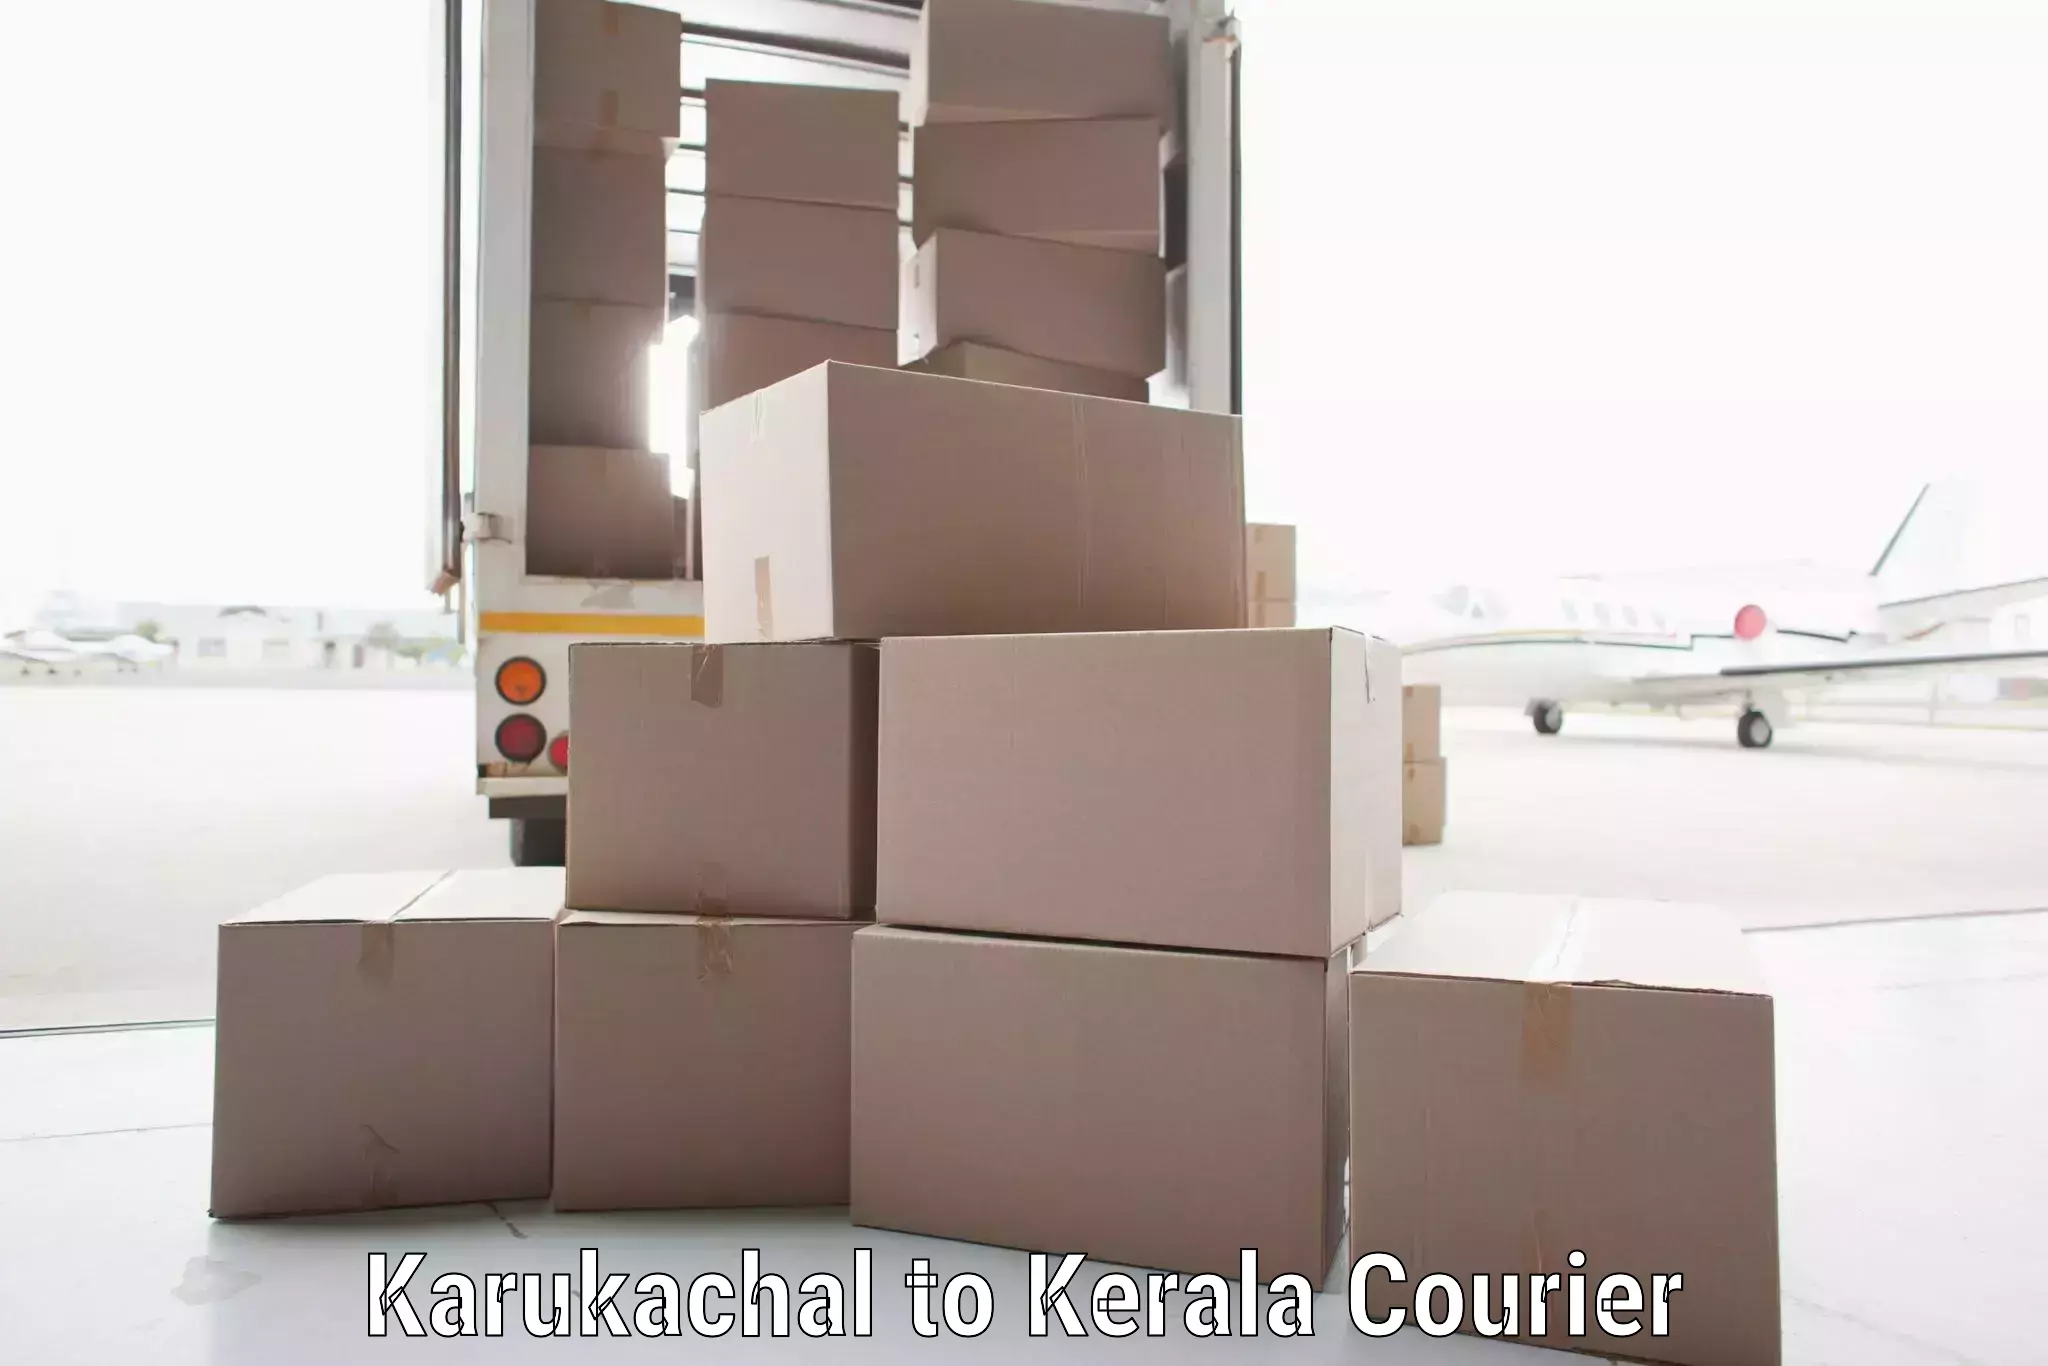 Pharmaceutical courier Karukachal to Cochin University of Science and Technology